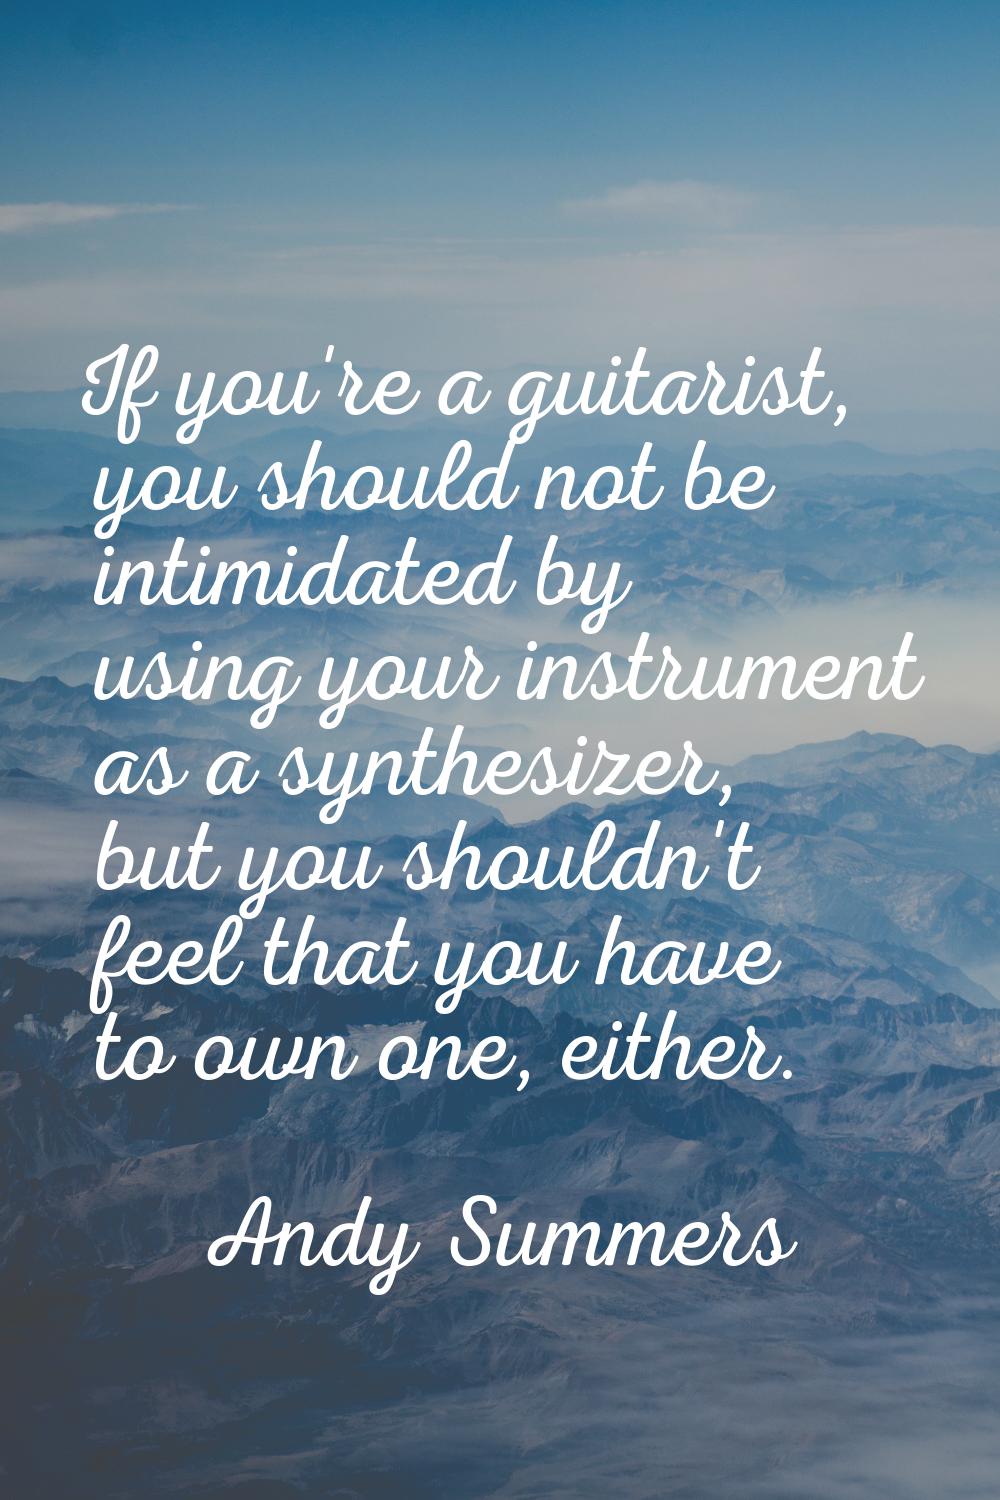 If you're a guitarist, you should not be intimidated by using your instrument as a synthesizer, but